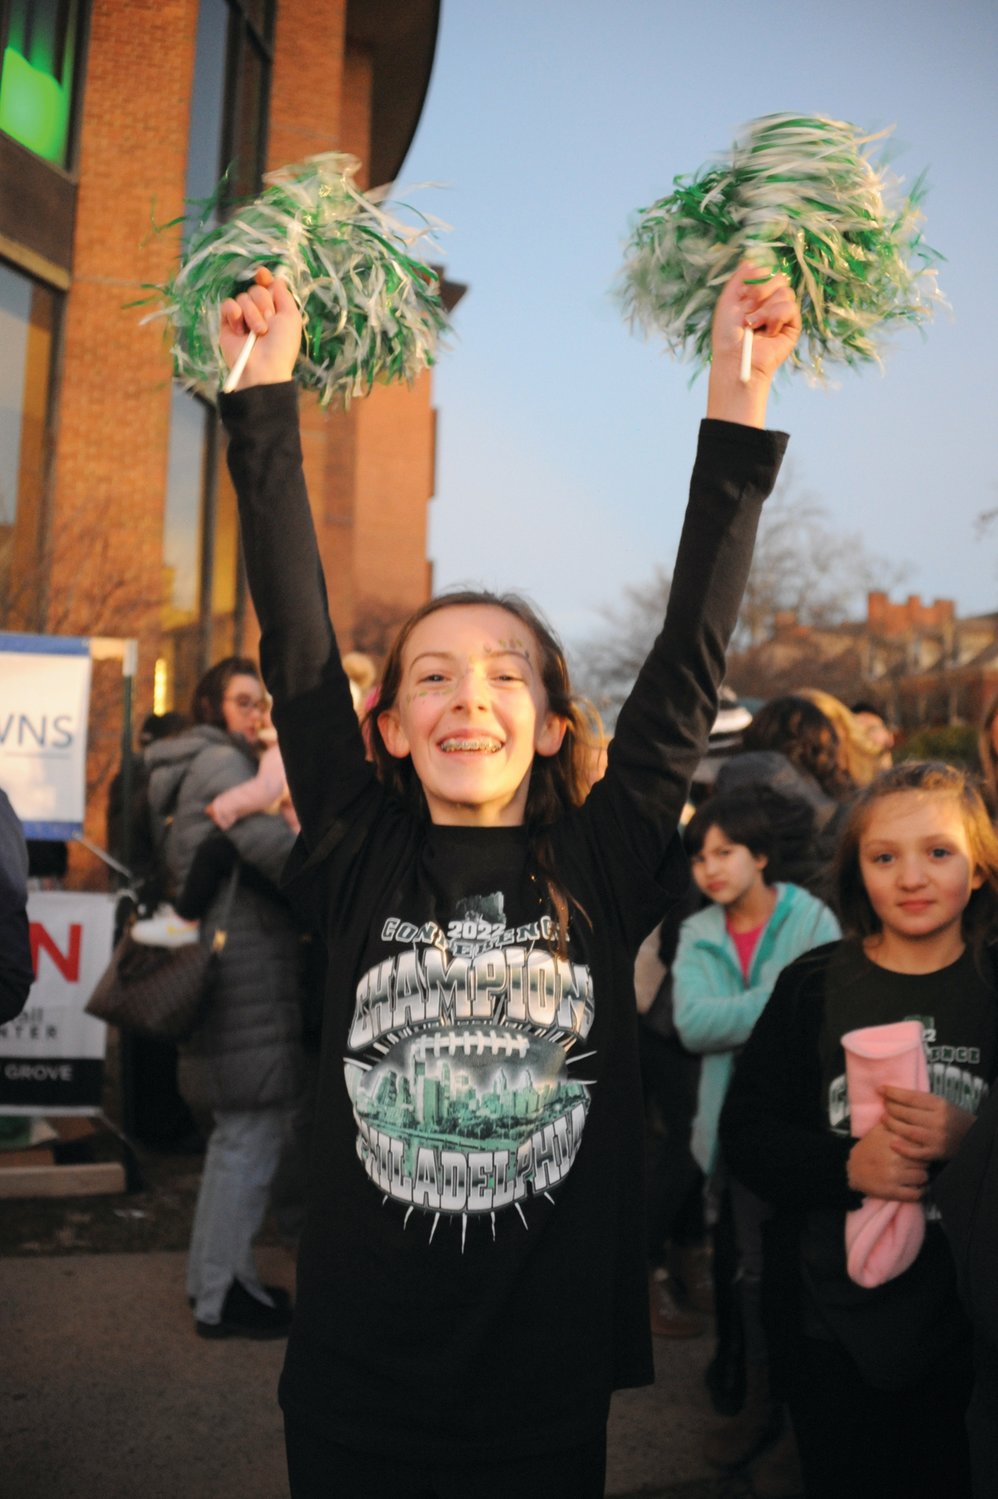 Olivia Felegyhazi cheers on the Eagles at the Herald’s “Bucks County Loves the Birds” pep rally on the lawn of the old county courthouse in Doylestown.